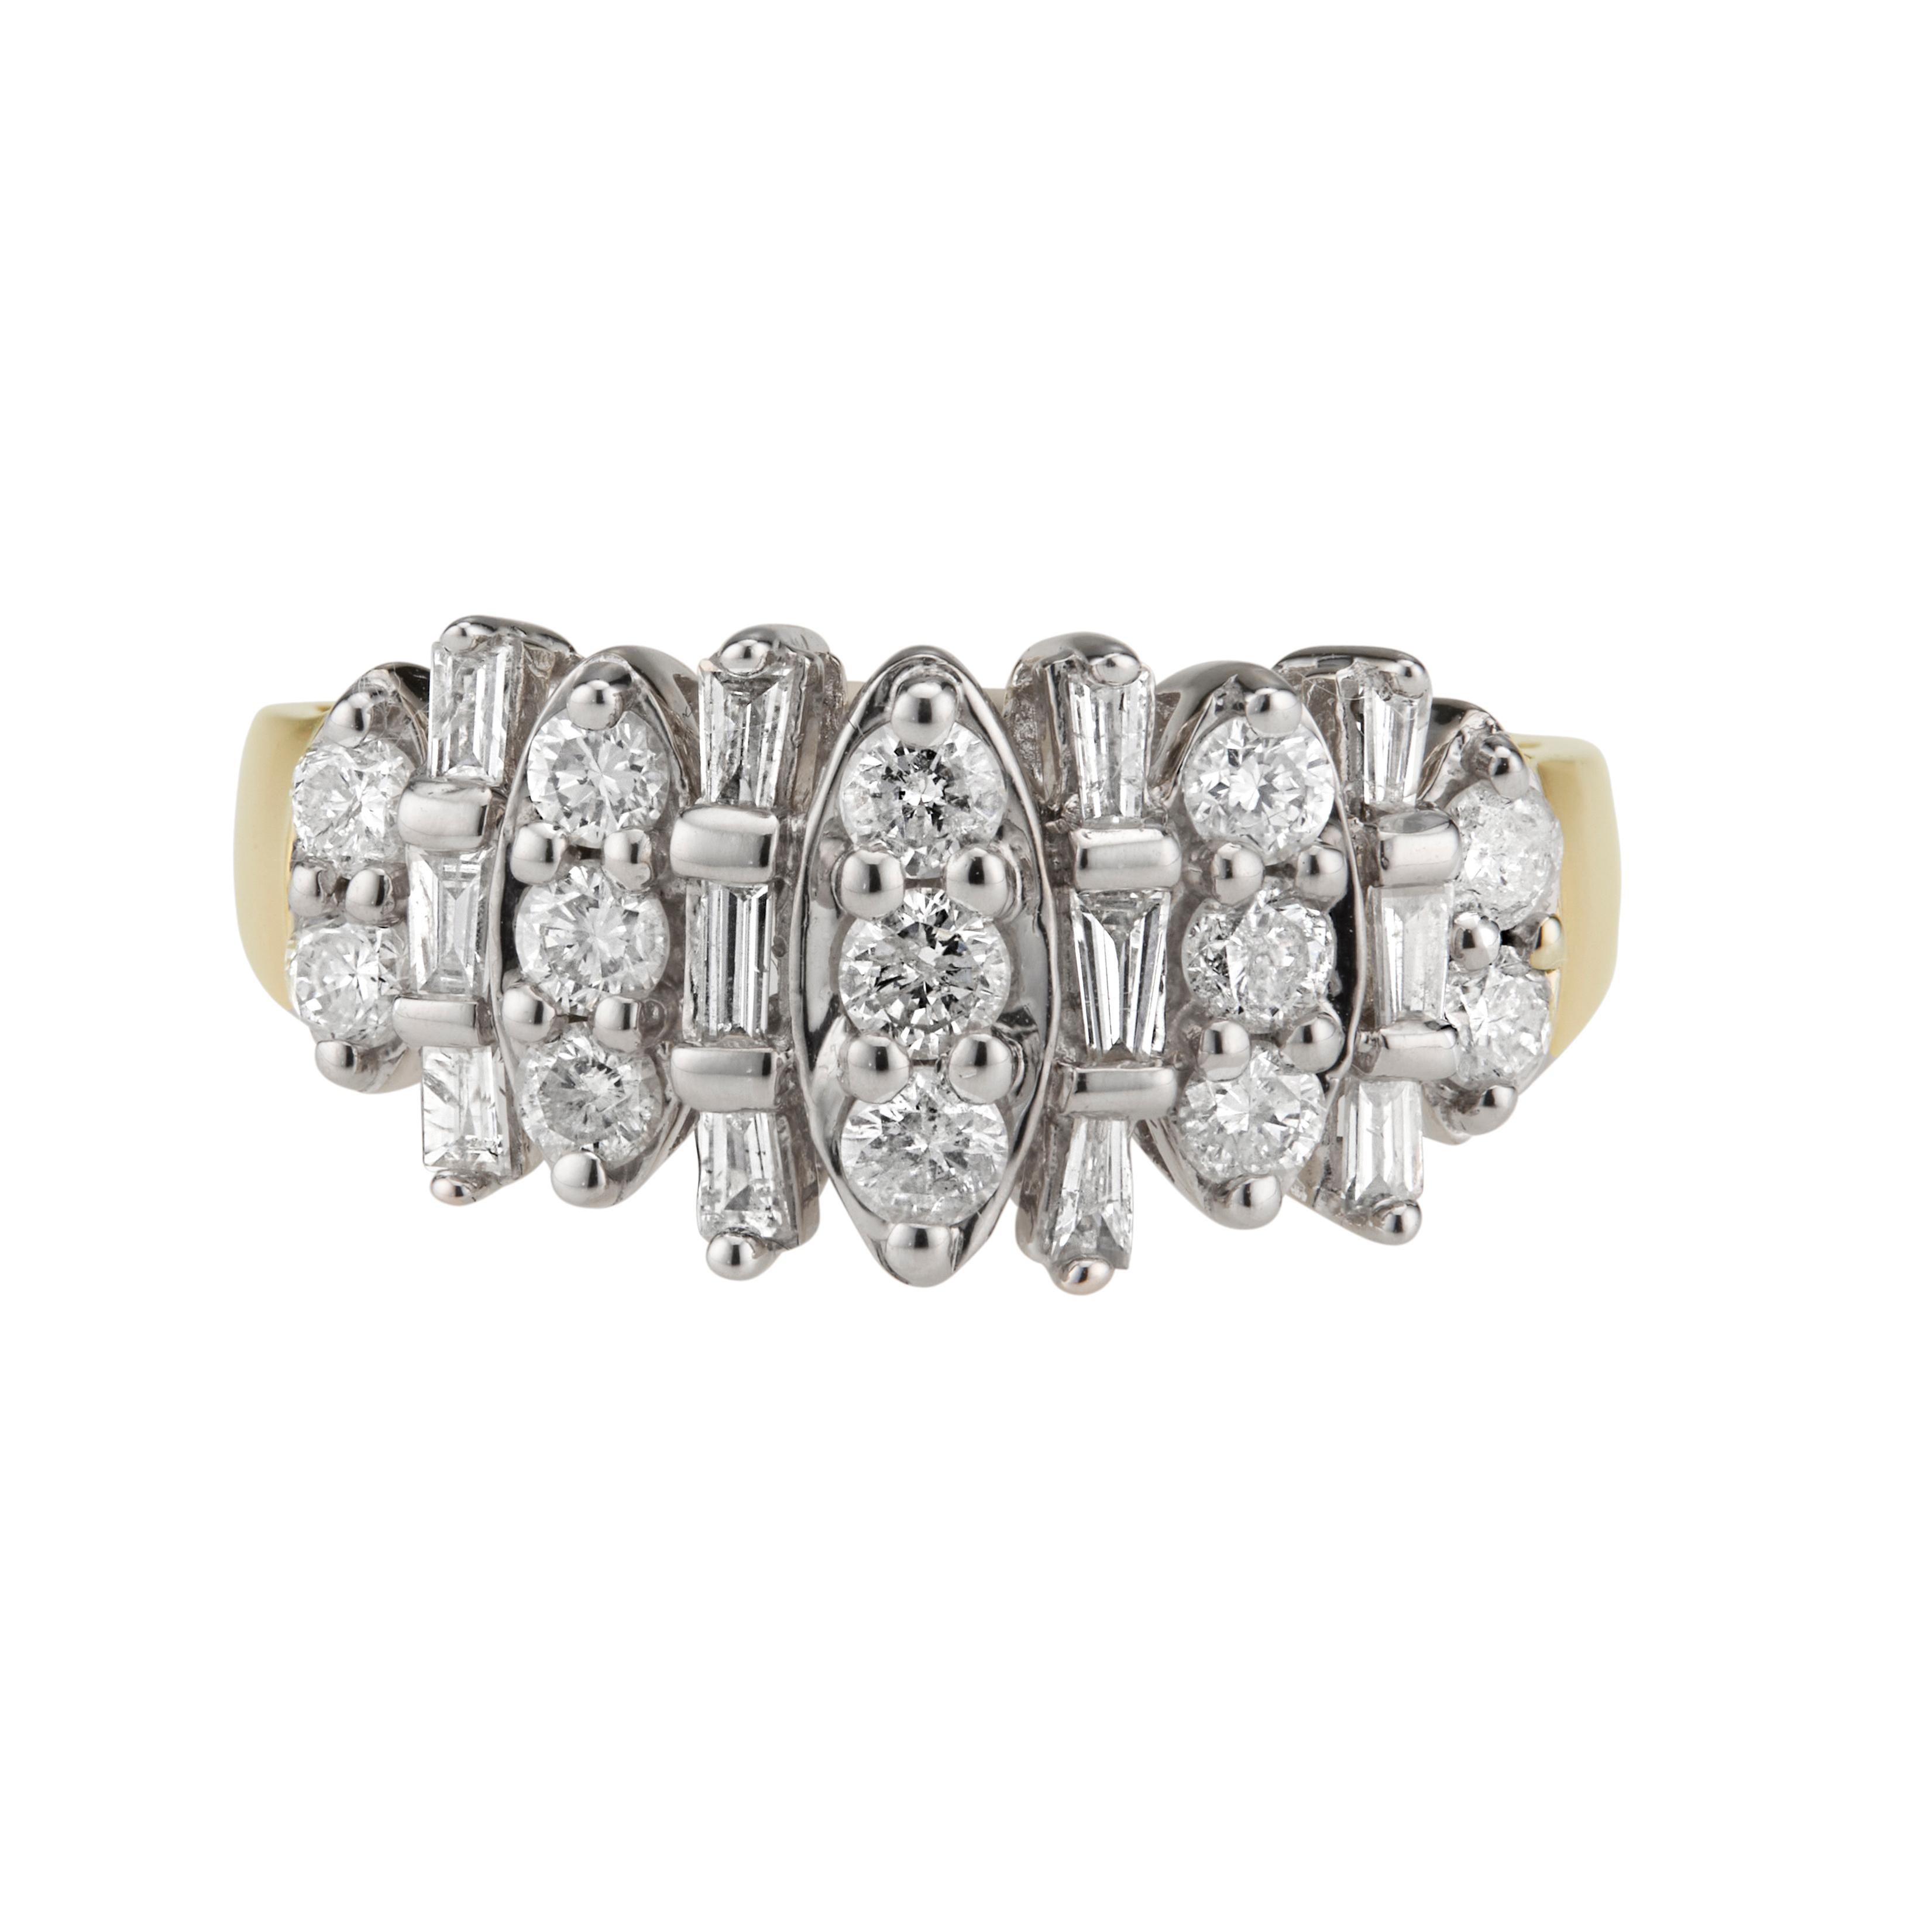 1980's diamond three row cocktail ring. 13 round diamonds with 12 step cut baguette diamonds a 10k white gold crown. 10 yellow shank.  

13 round diamonds, H-I I approx. .75cts
12 step cut baguette diamonds, H-I SI I approx. .25cts
Size 7 and